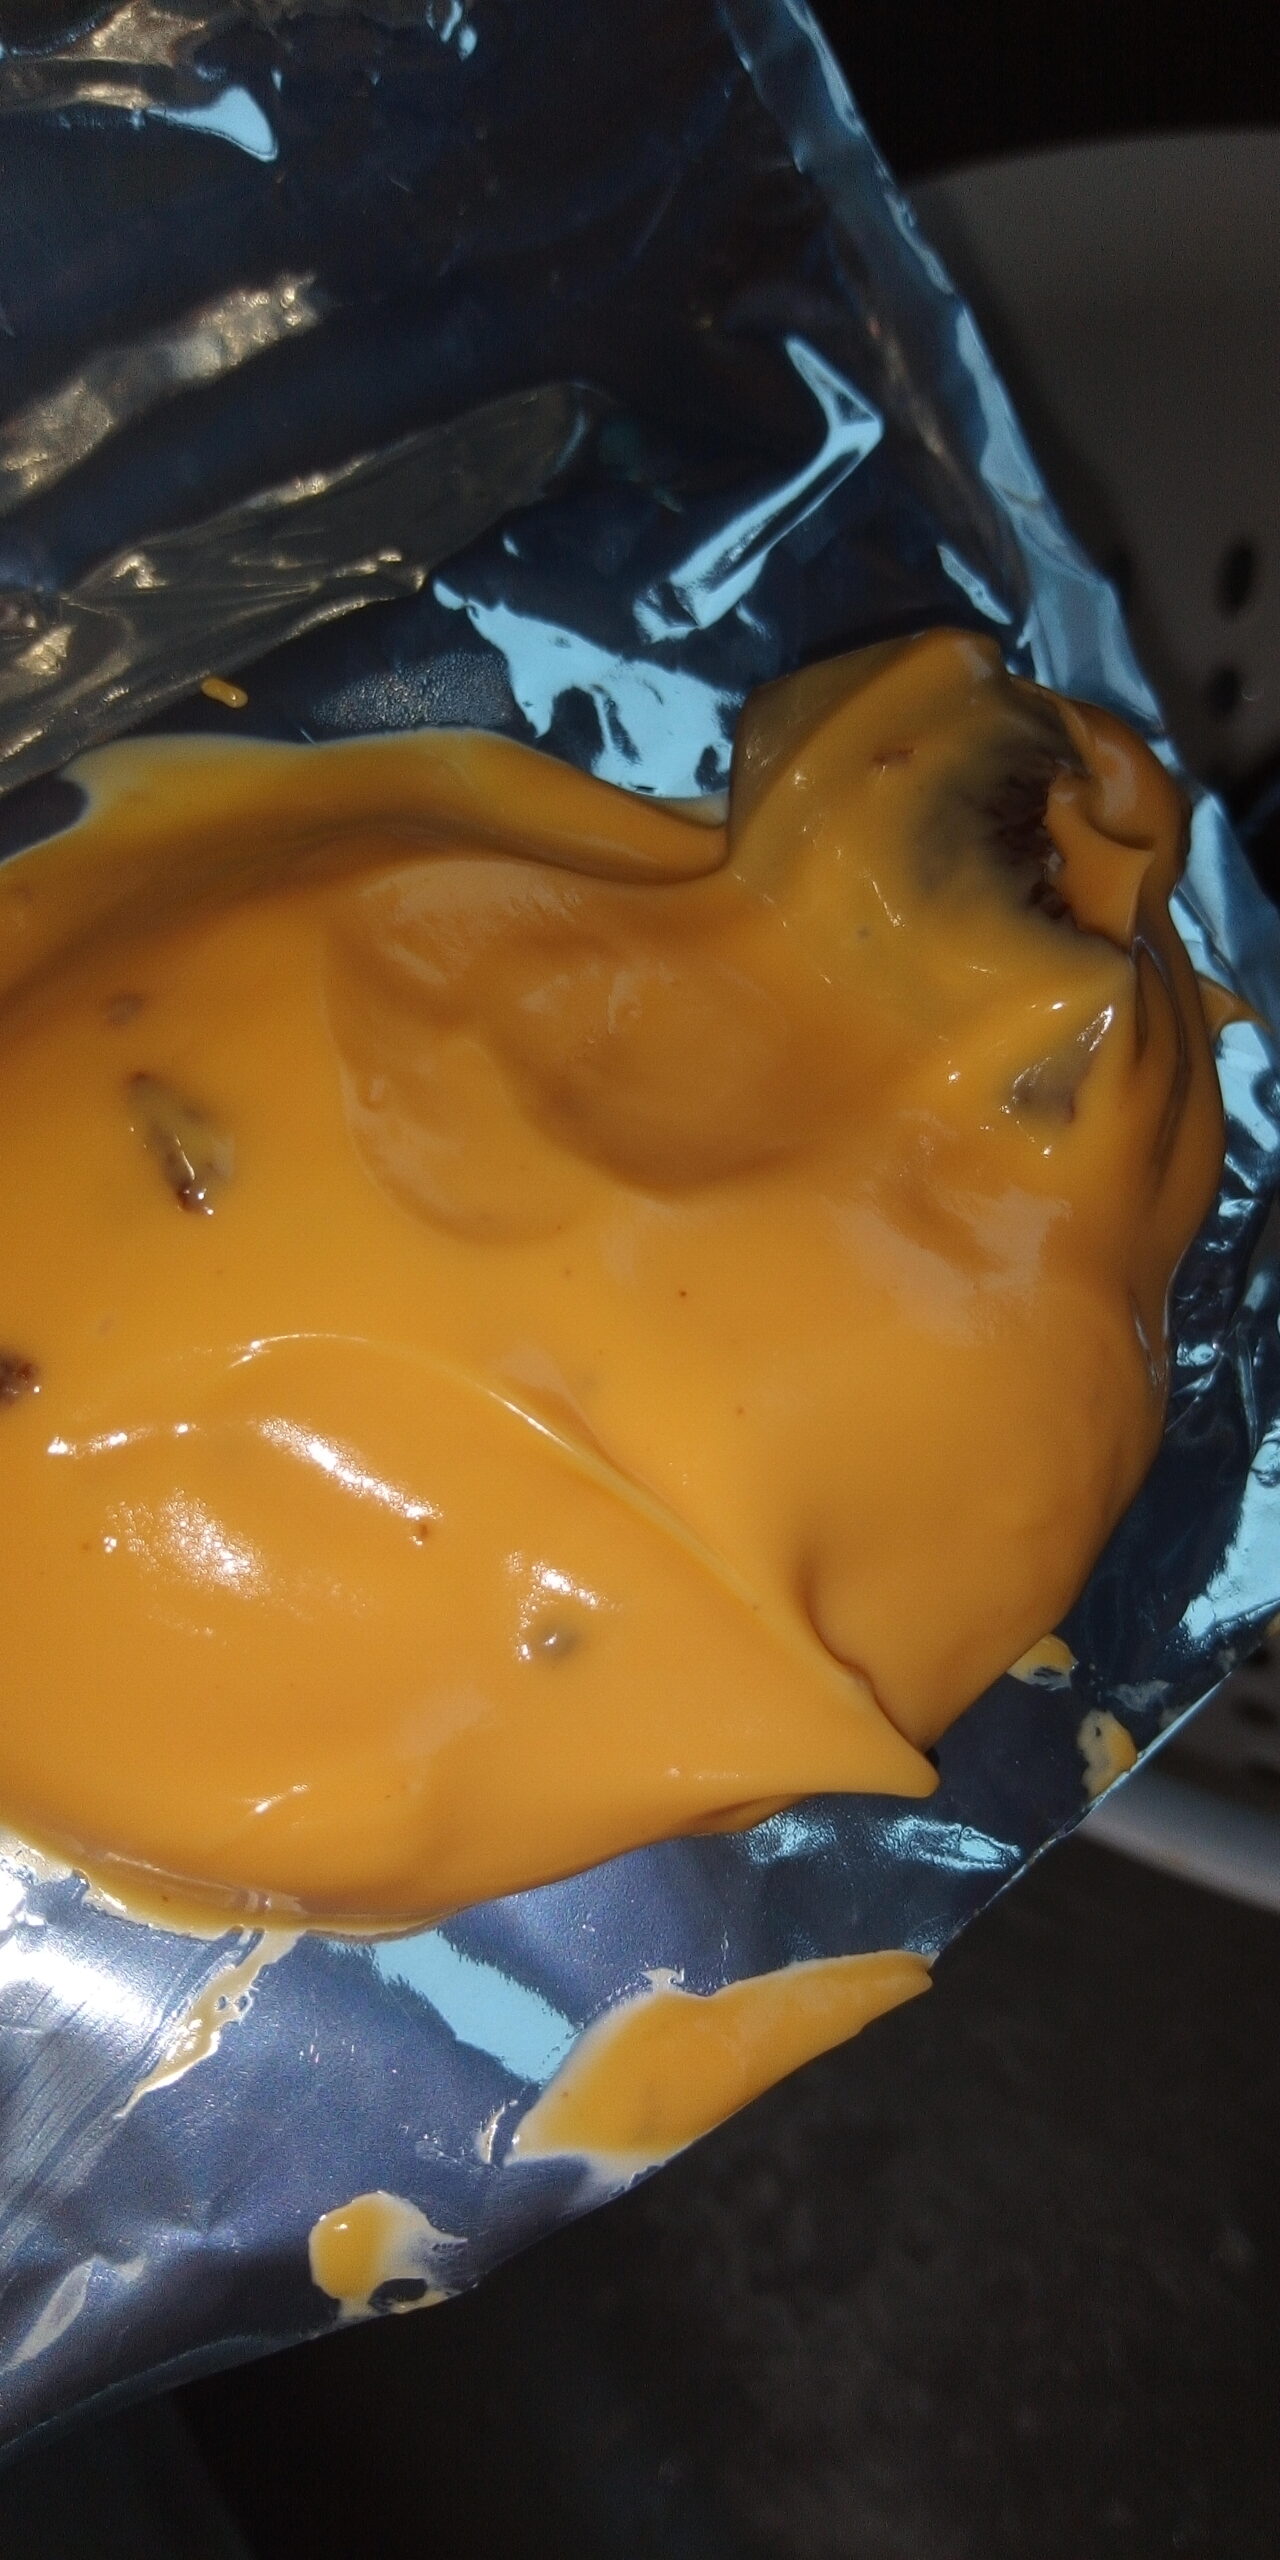 Brown chunks of mold in cheese